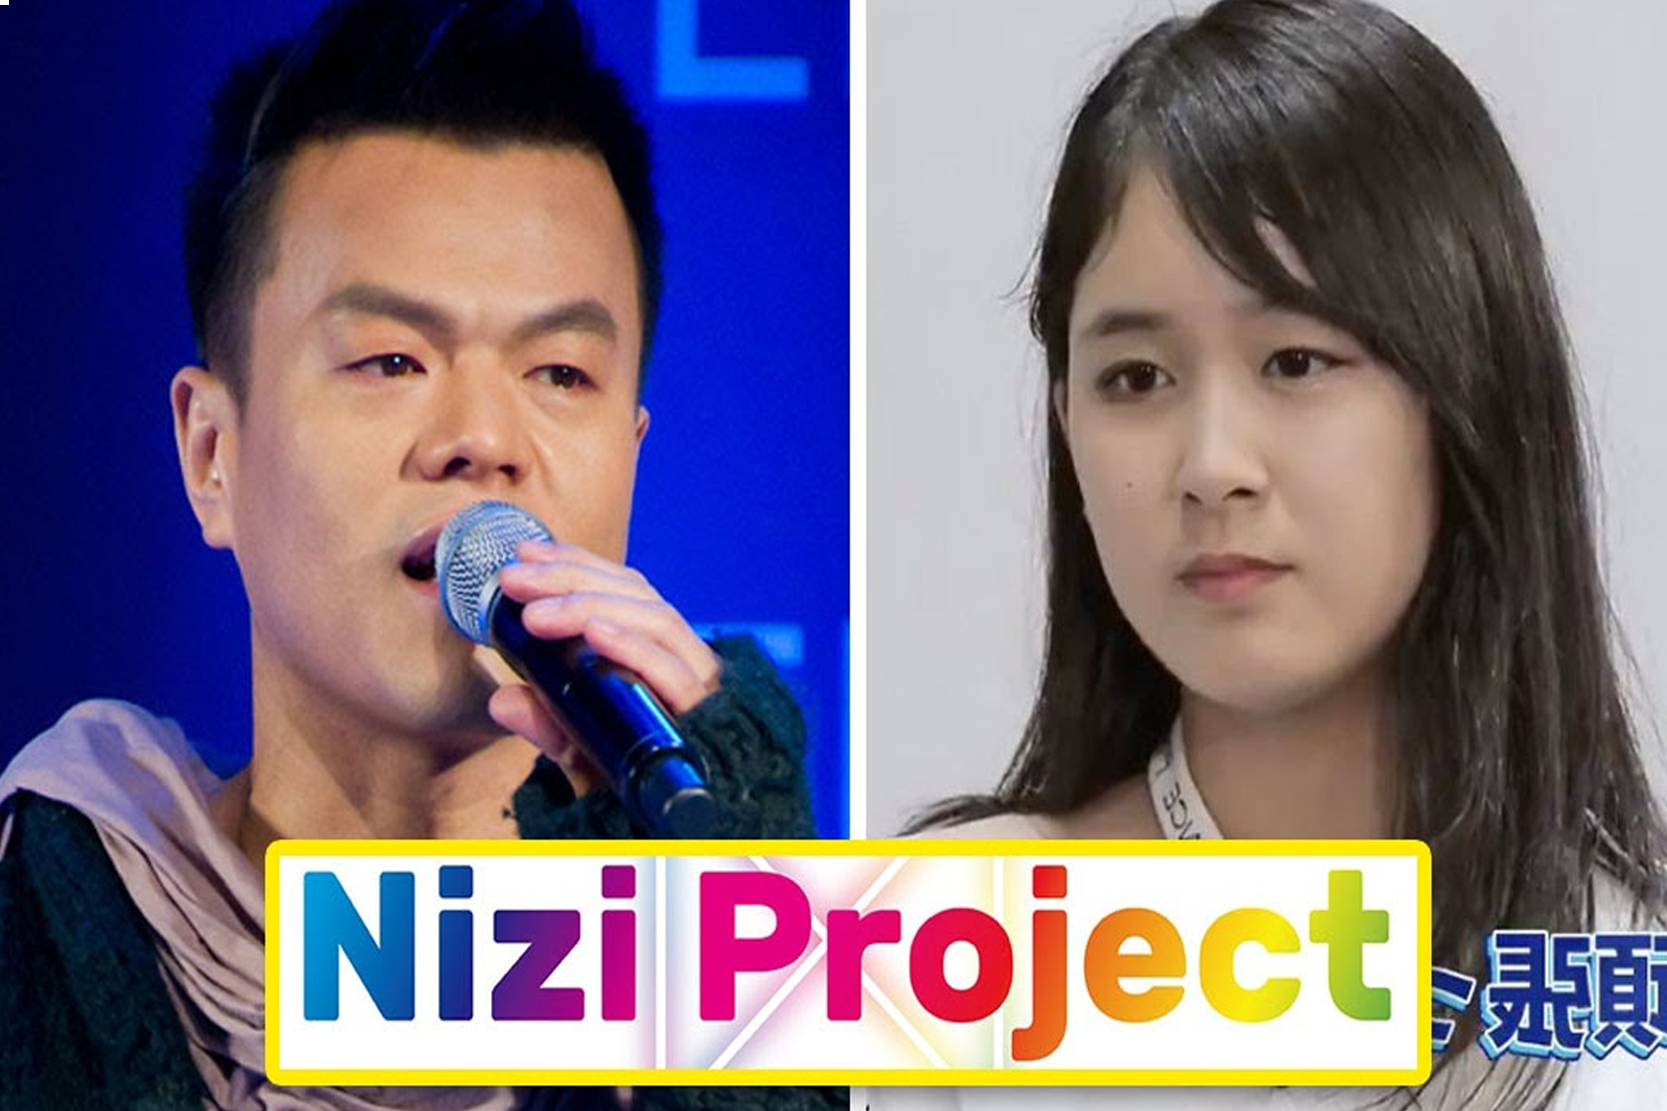 Park Jin Young criticized for critiquing an underage “Nizi Project” contestant’s weight